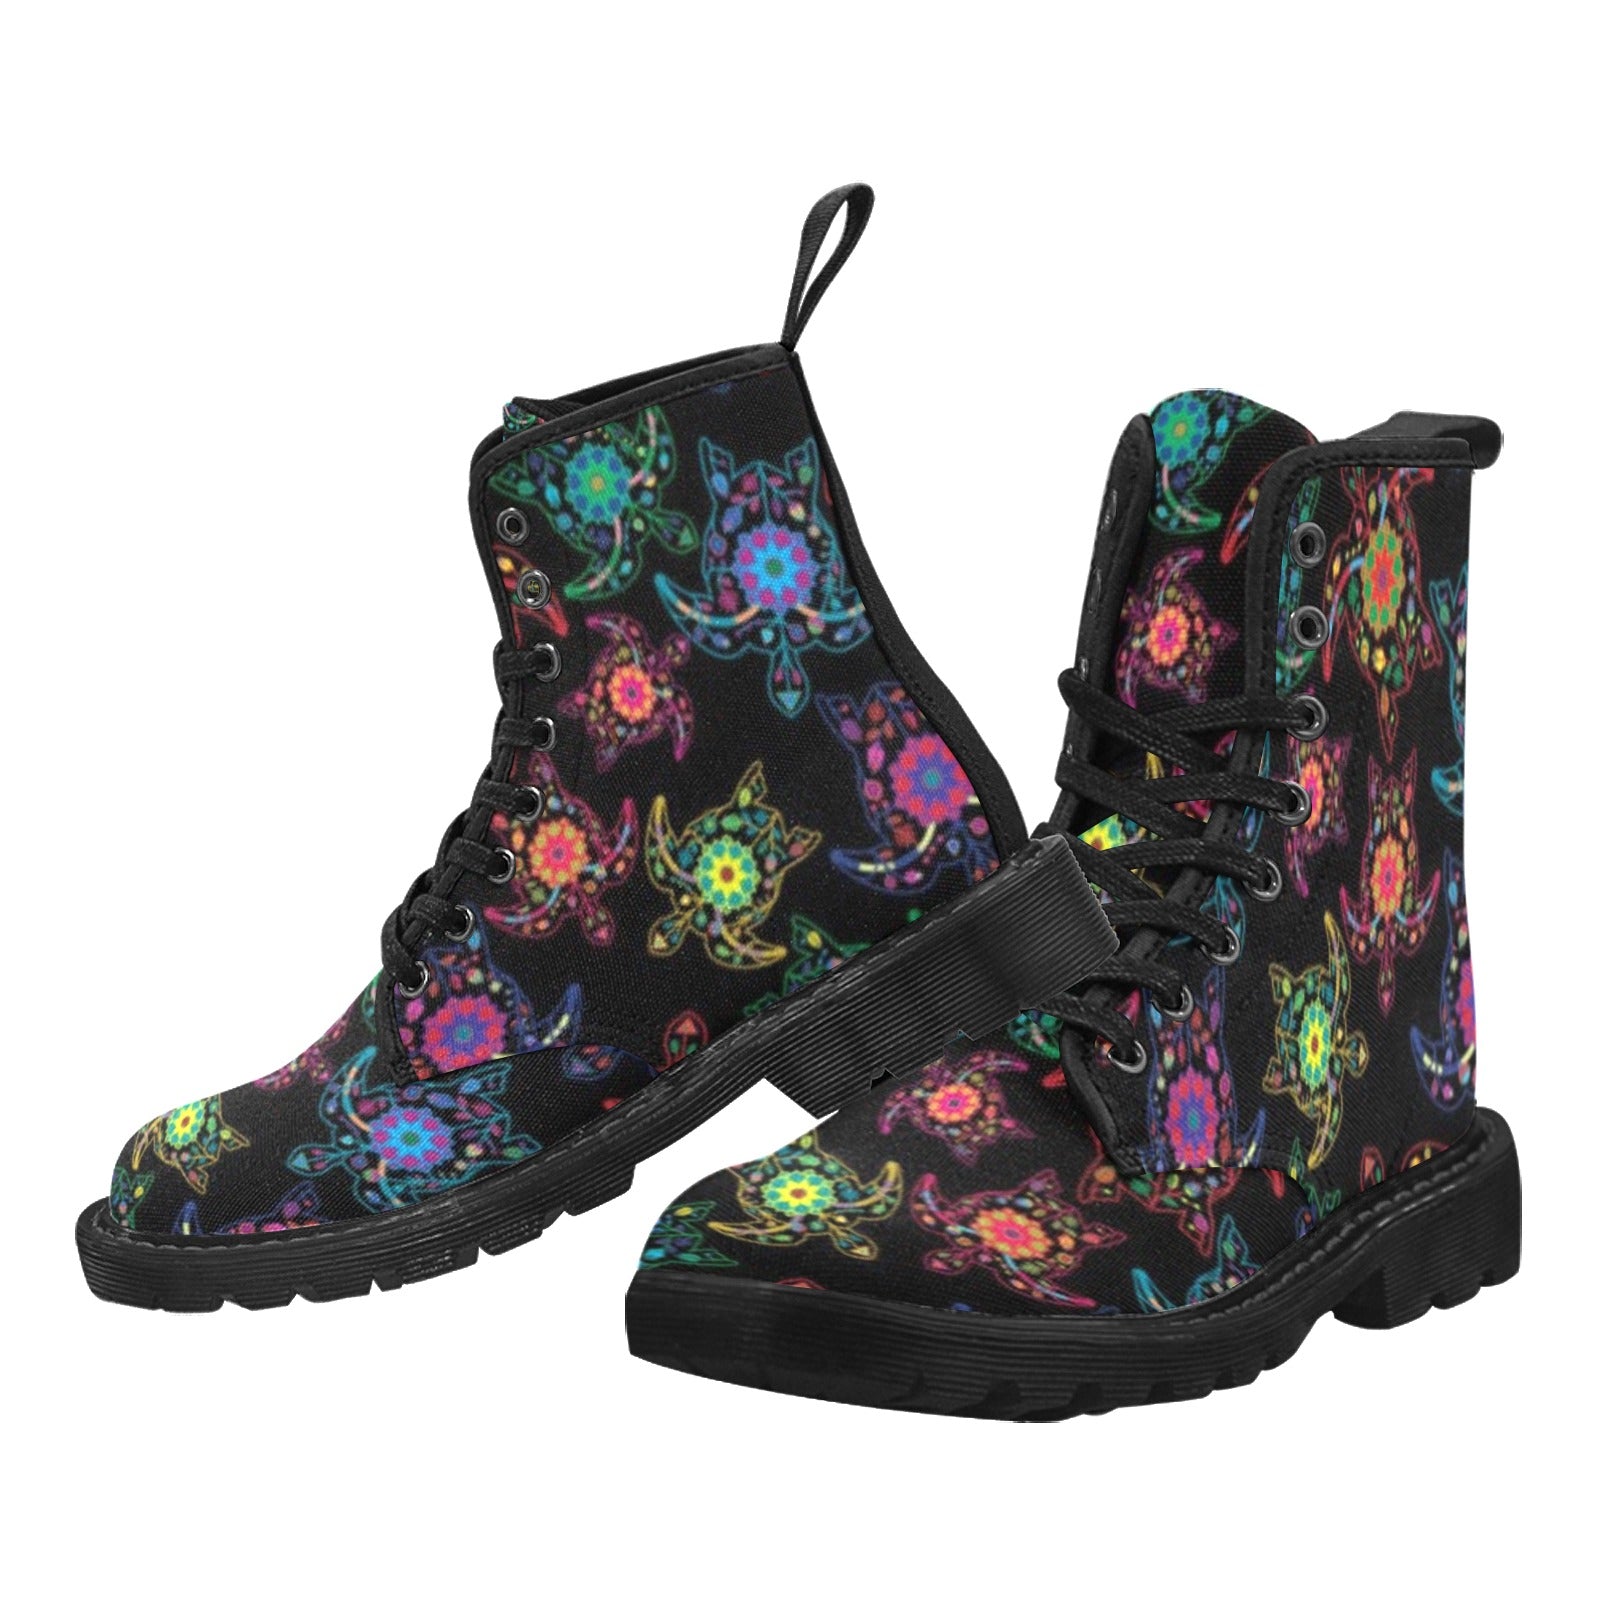 Neon Floral Turtle Boots for Women (Black)